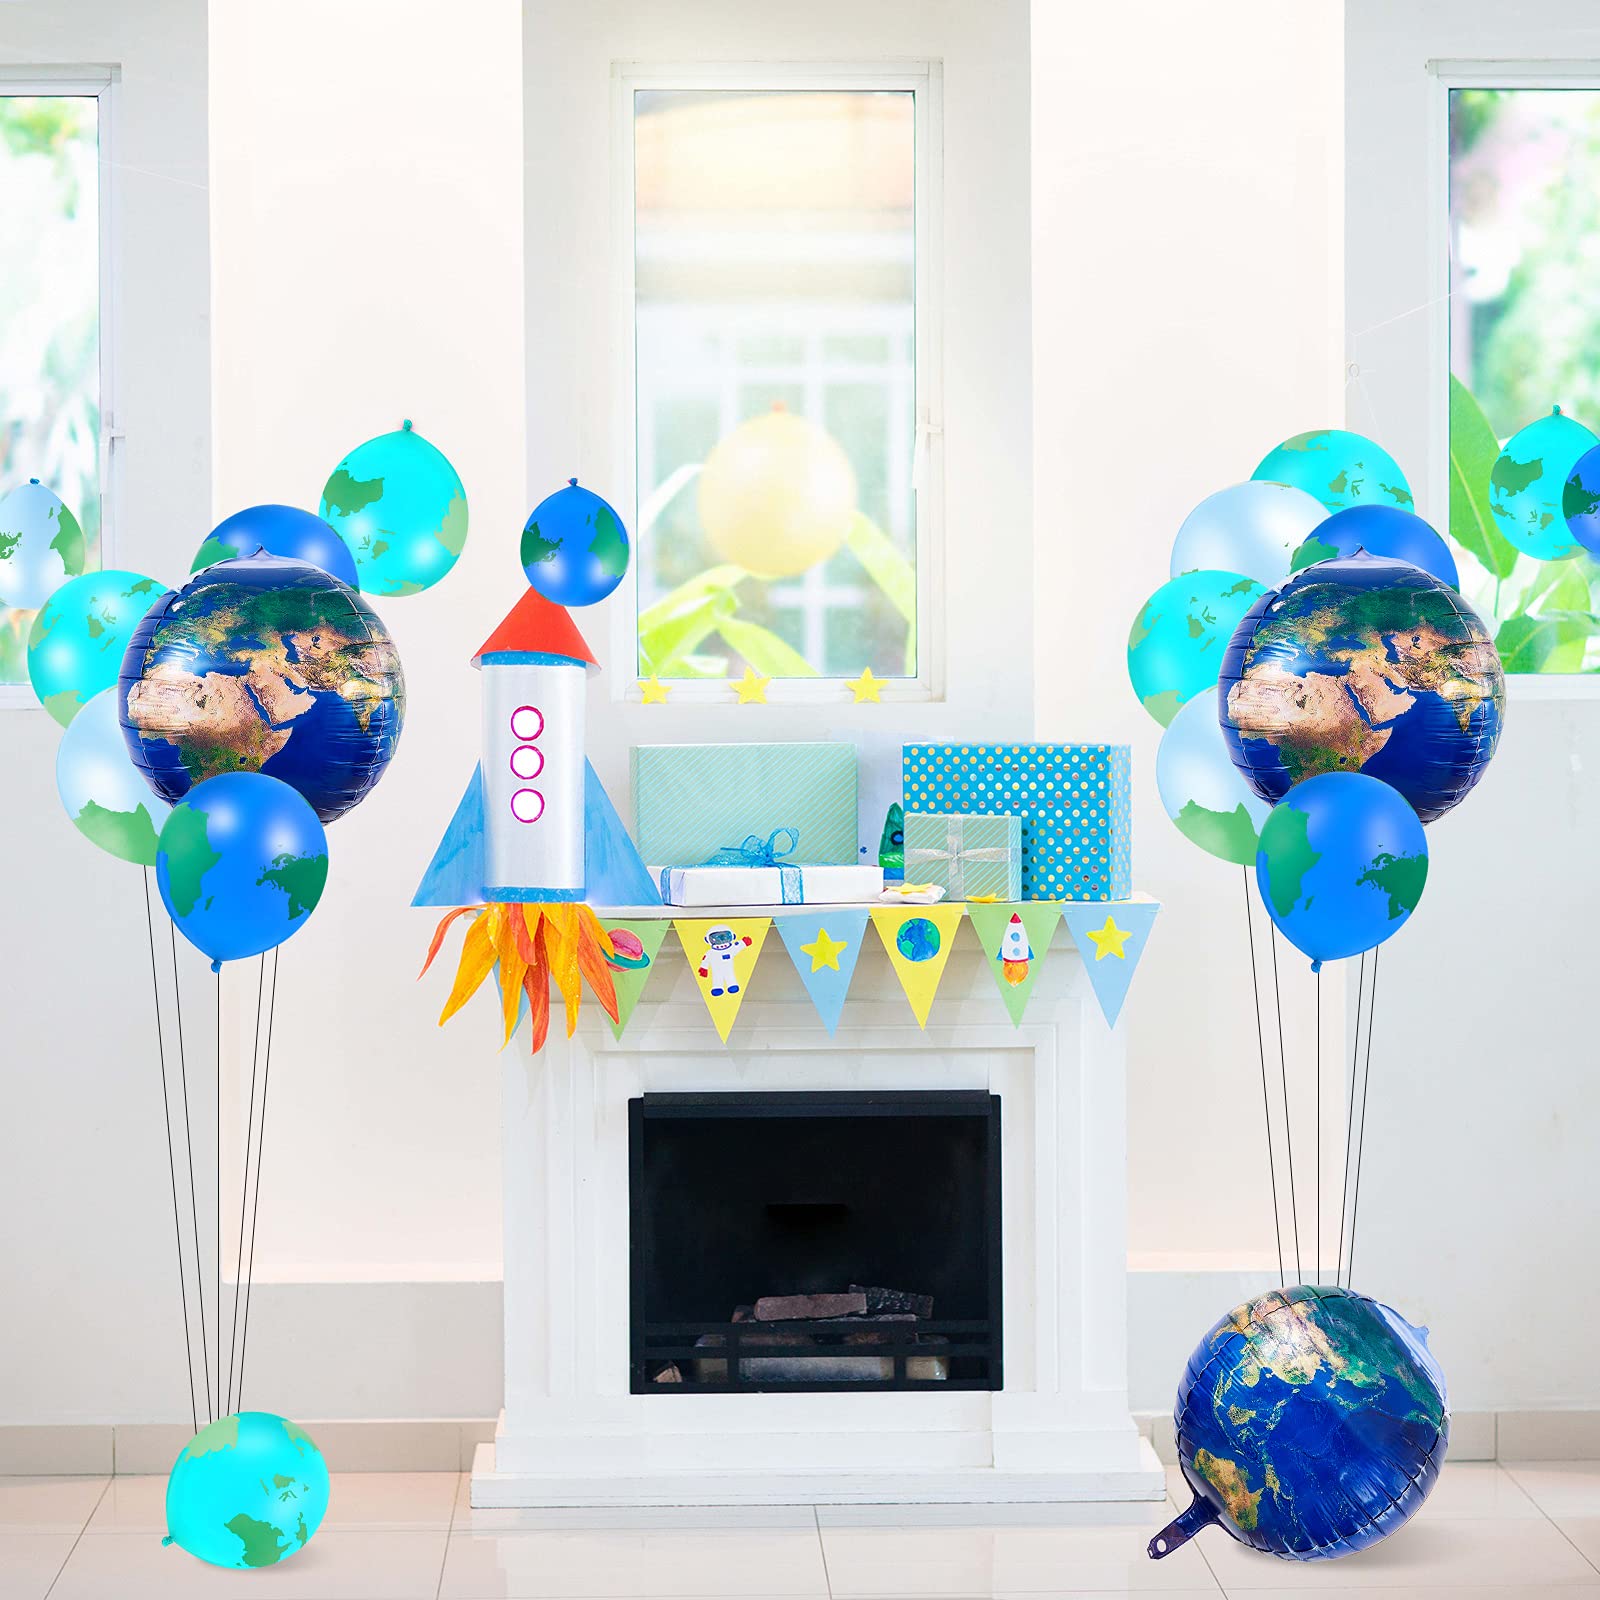 48 Earth Balloons Set Include 8 Pieces 22 Inch Planet Balloon Global Balloon 40 Pieces 12 Inch World Map Latex Balloon Garland for Travel Theme Space Theme Party Earth Day Decoration Teaching Supplies